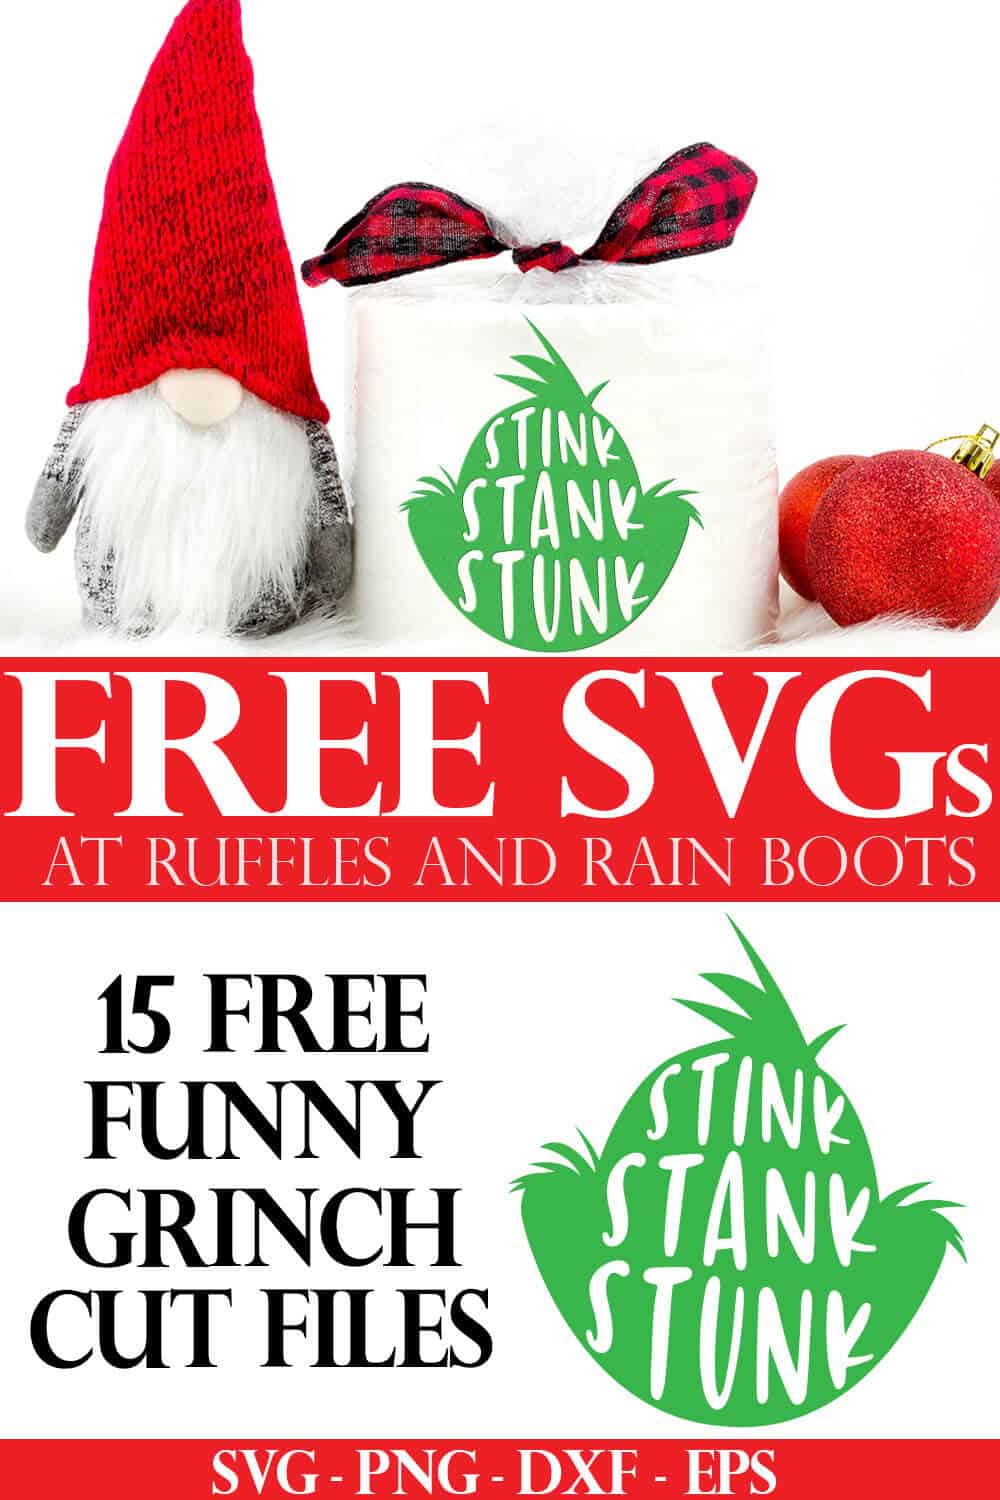 adorable holiday bathroom cricut idea with stink stank stunk grinch svg on toilet paper roll with text which reads 15 free funny Grinch SVG and cut files